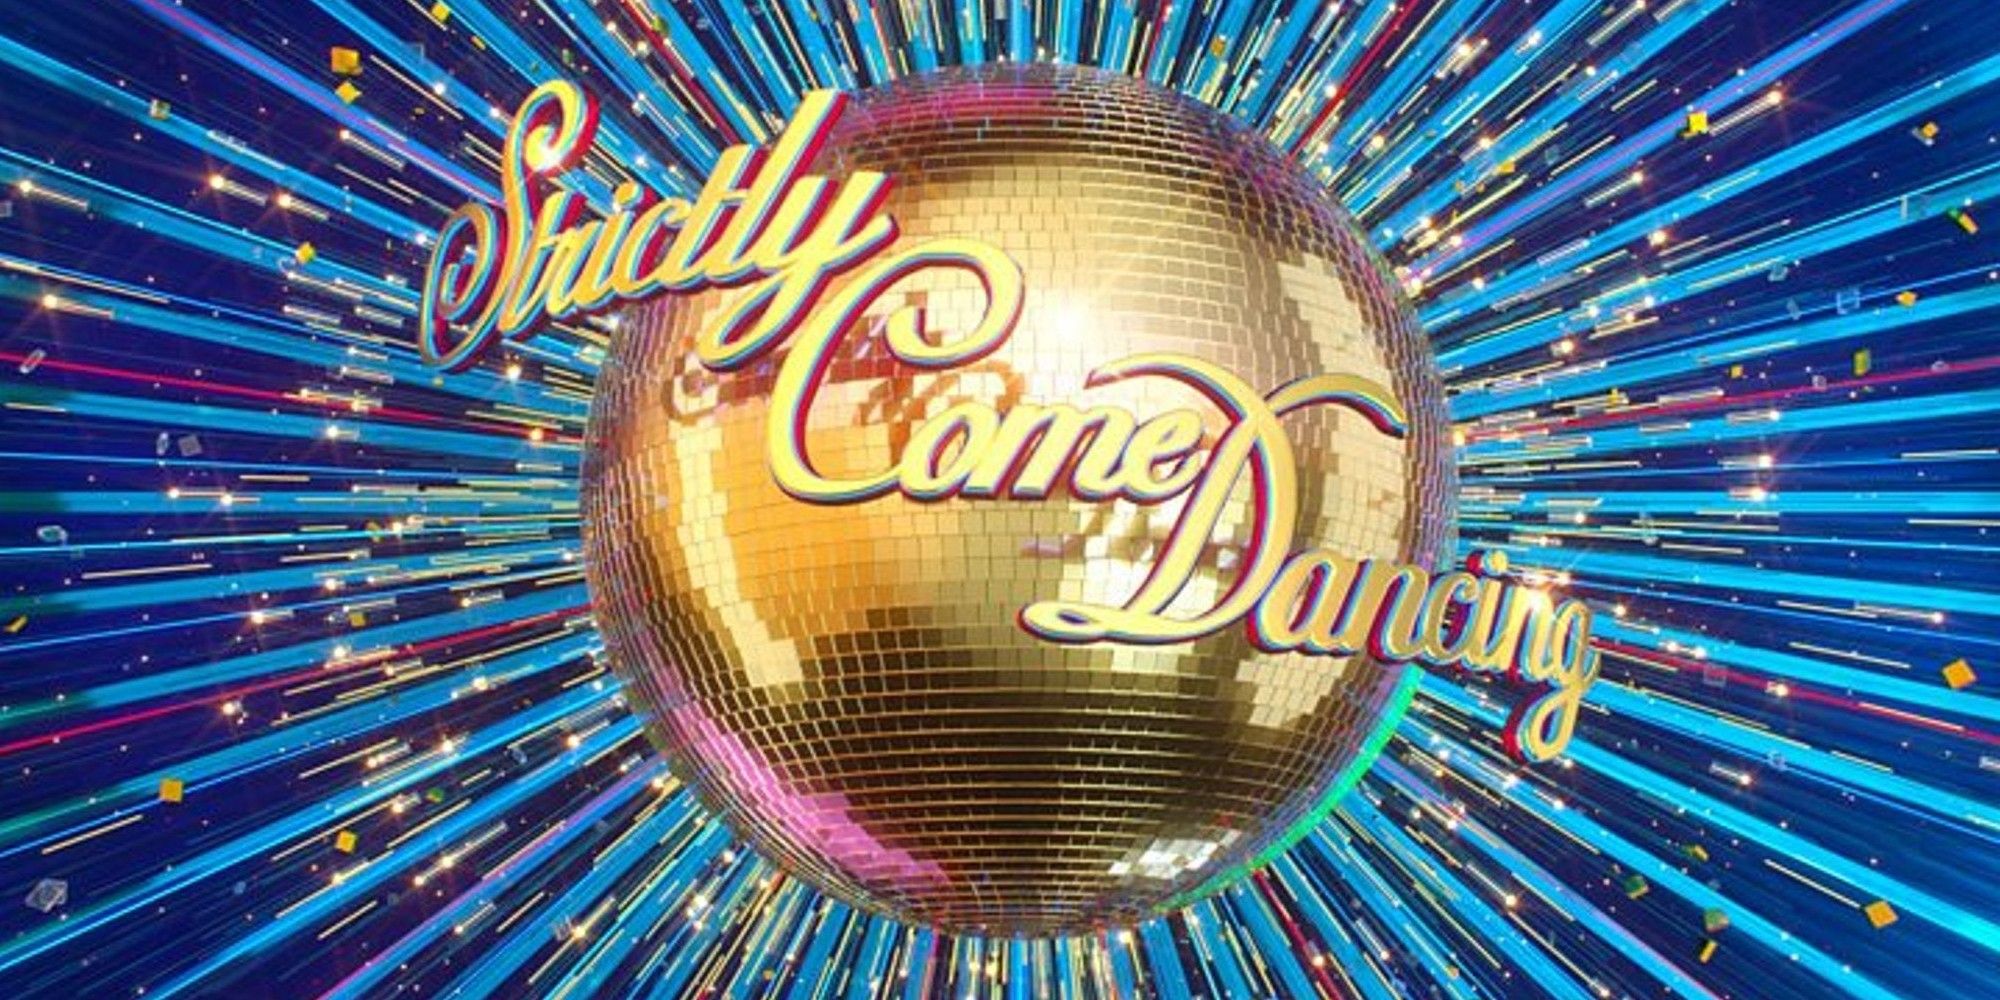 strictly come dancing logo 2